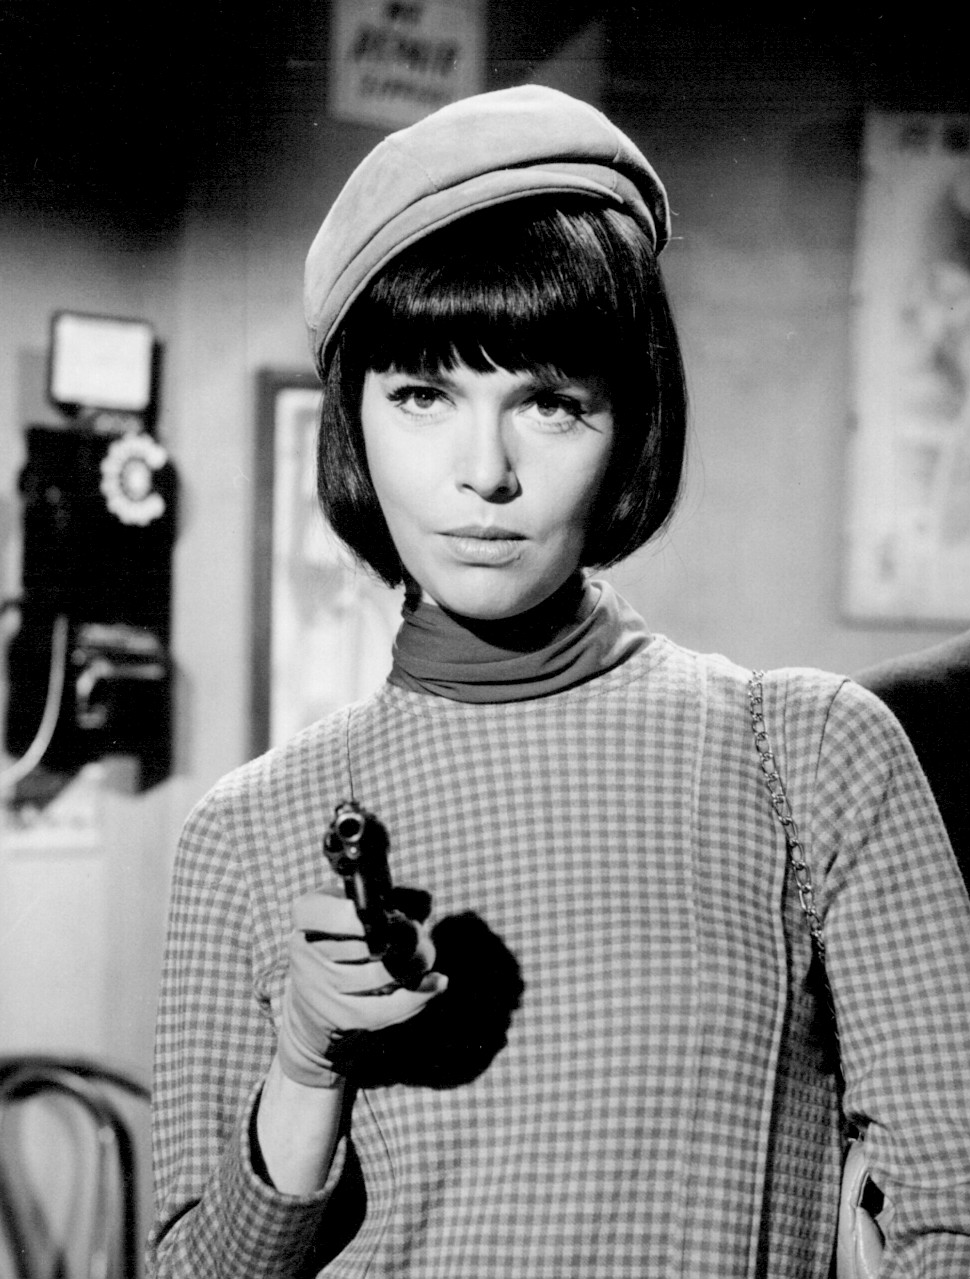 Still from a TV show depicting a well-dressed woman aiming a handgun.